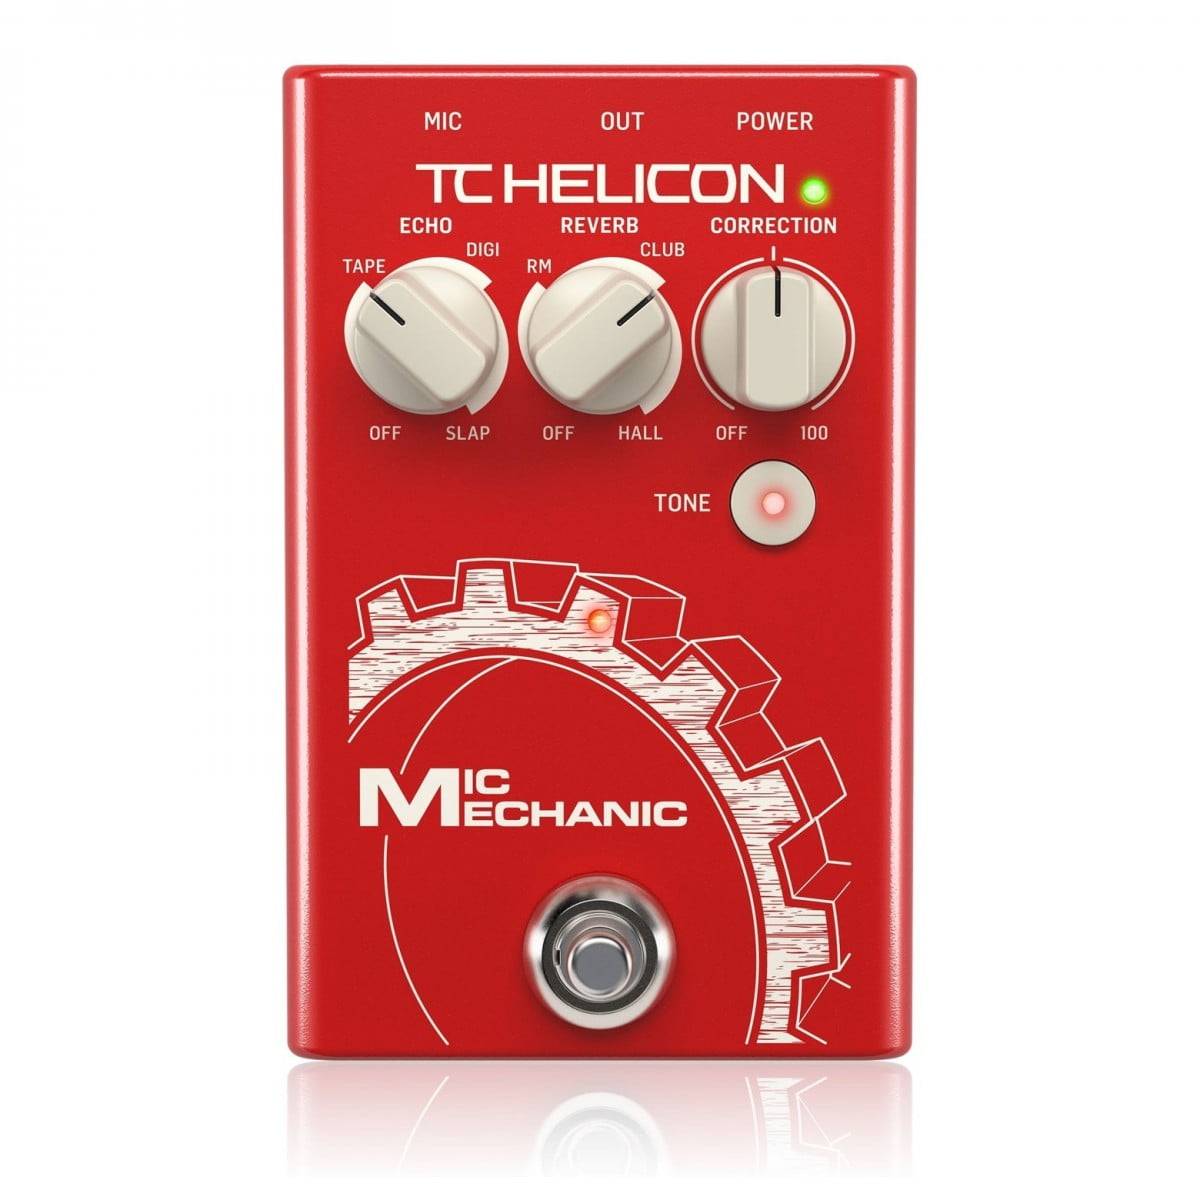 TC Helicon Mic Mechanic 2 Vocal Processor - New TC Helicon           Reverb        Guitar Effect Pedal